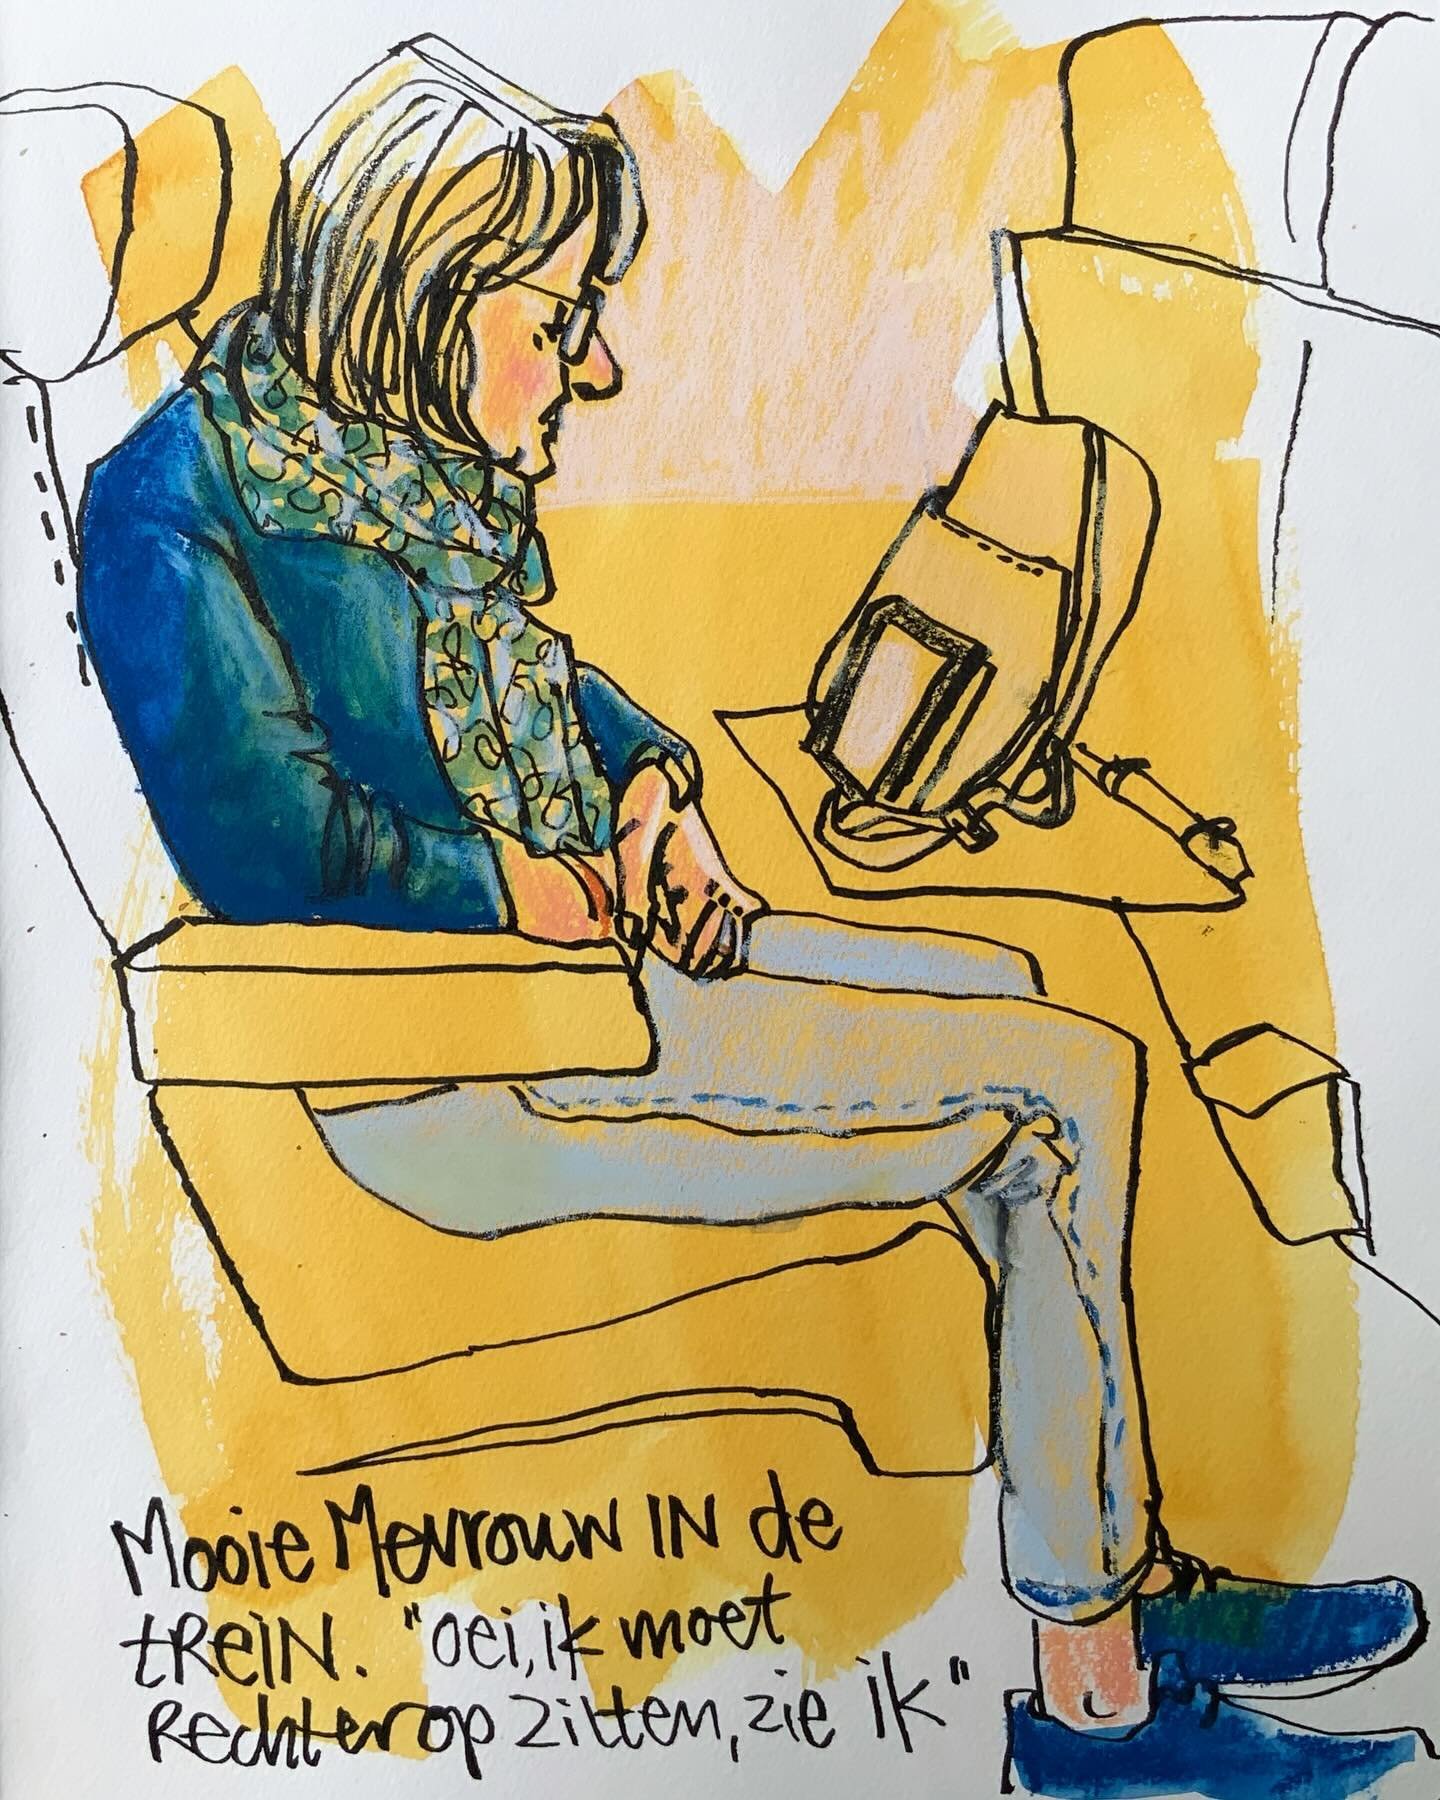 On the train today, I noticed this lovely lady reading her kindle and started draw in her. She noticed me drawing, and her eyes lit up when I showed her my drawing of her. She also noticed her posture. I always exaggerate postures and body language i